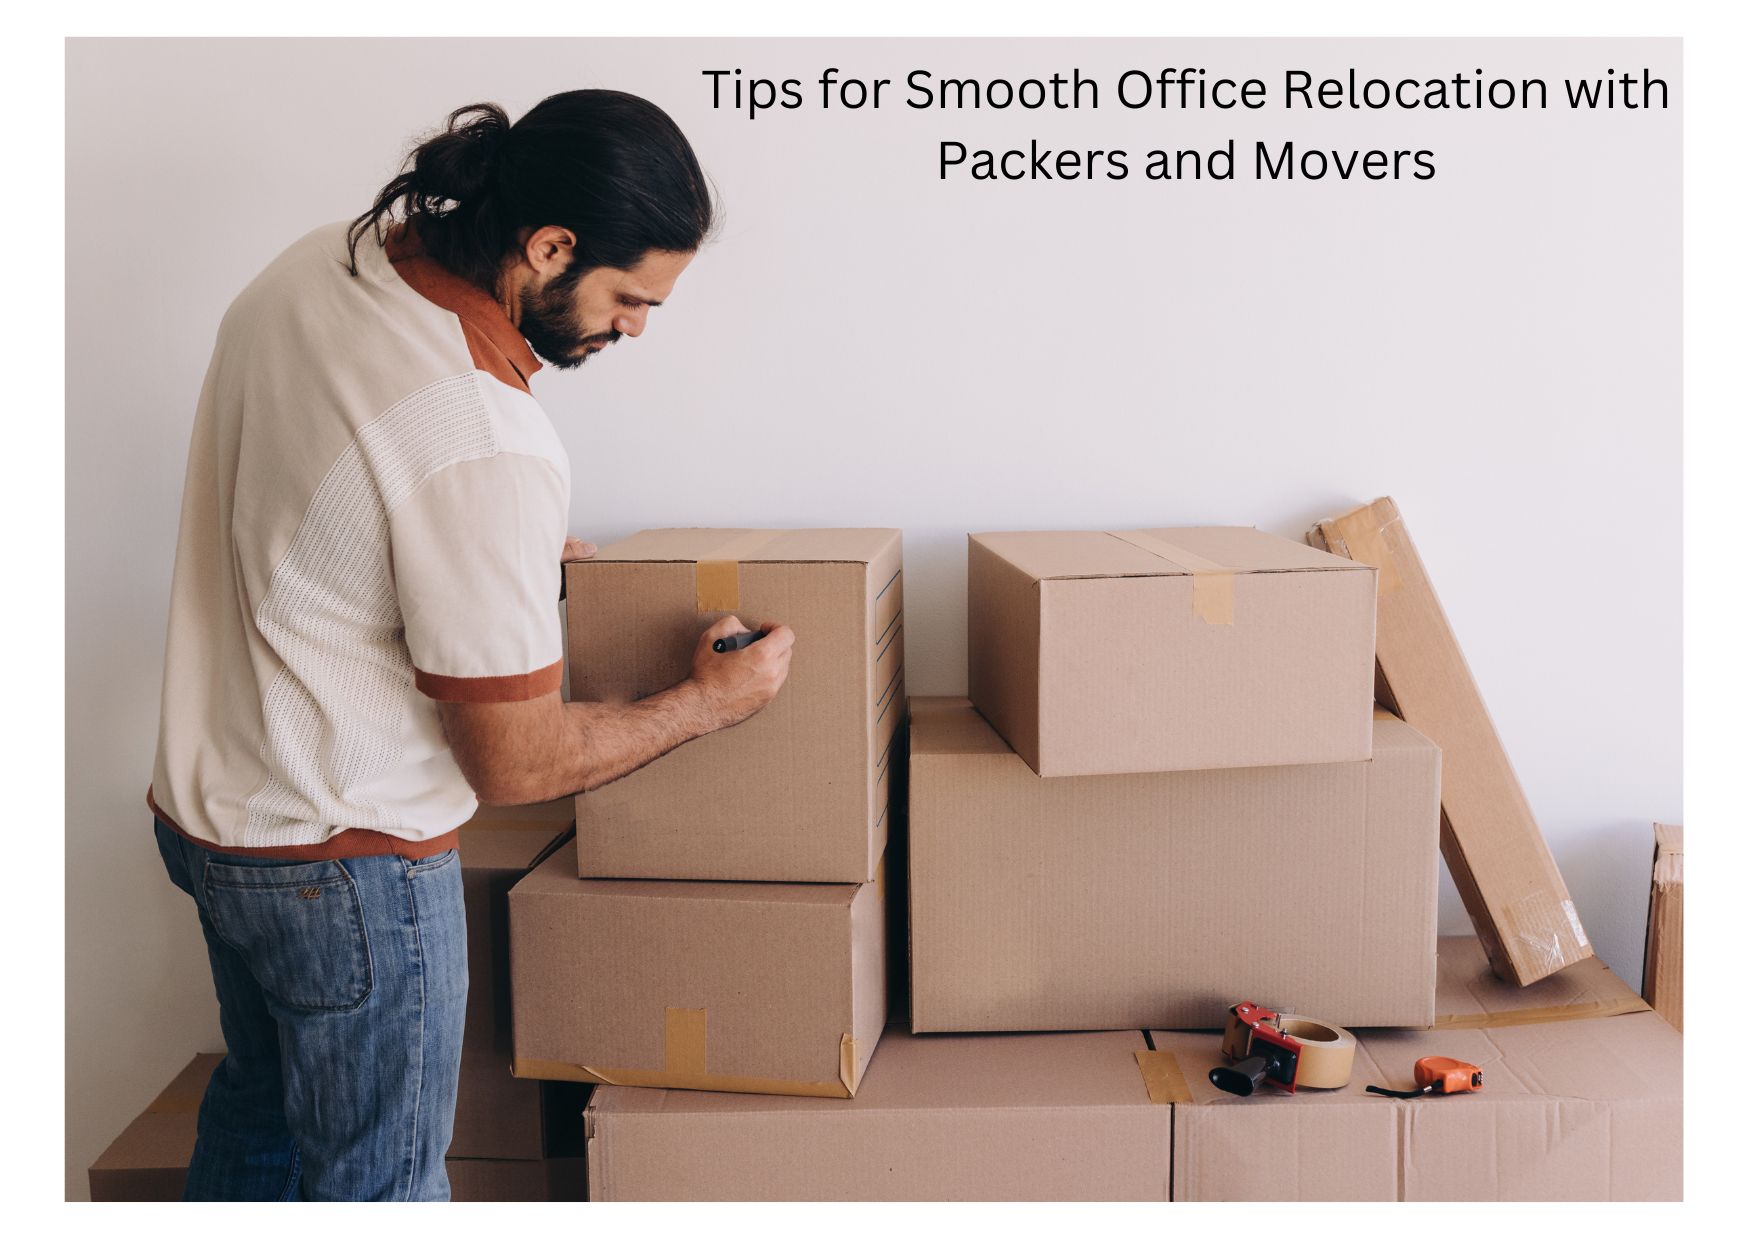 Tips for Smooth Office Relocation with Packers and Movers